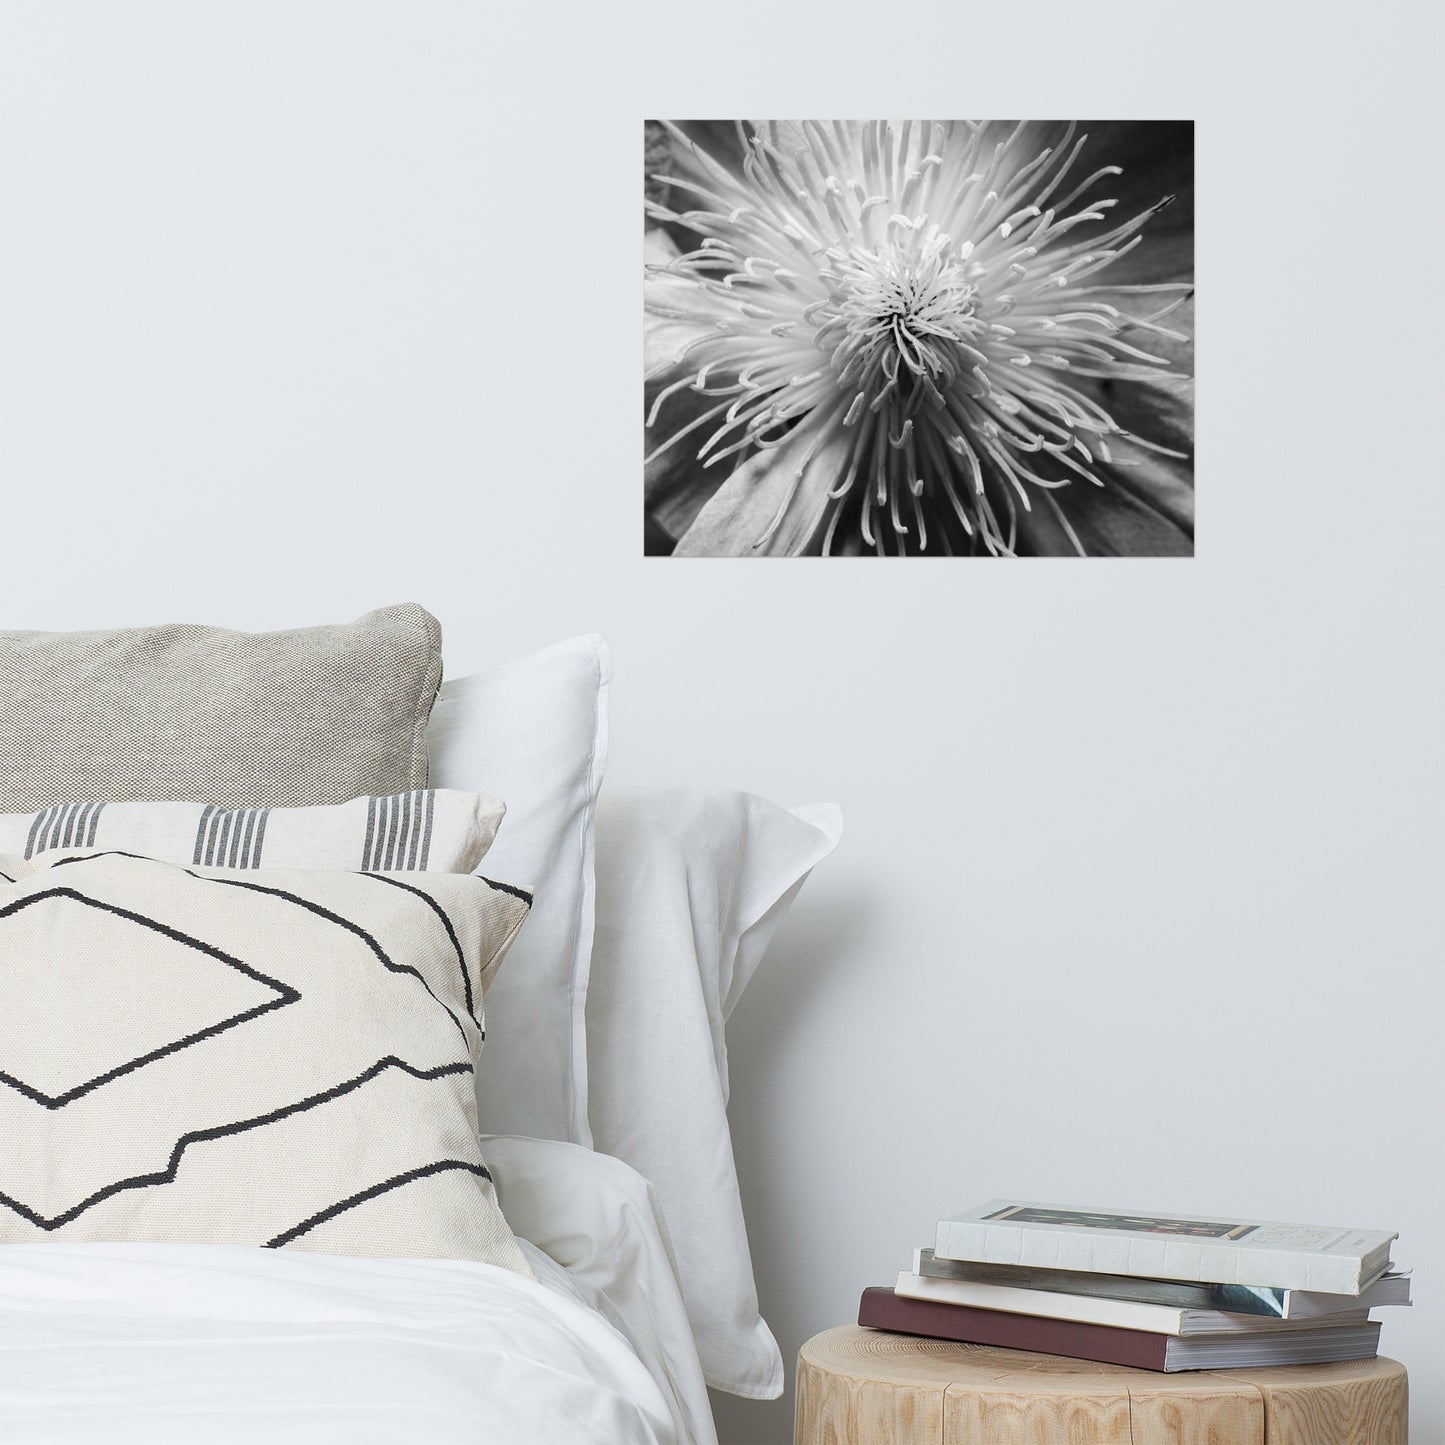 Center of Clematis Floral Nature Photo Loose Unframed Wall Art Prints